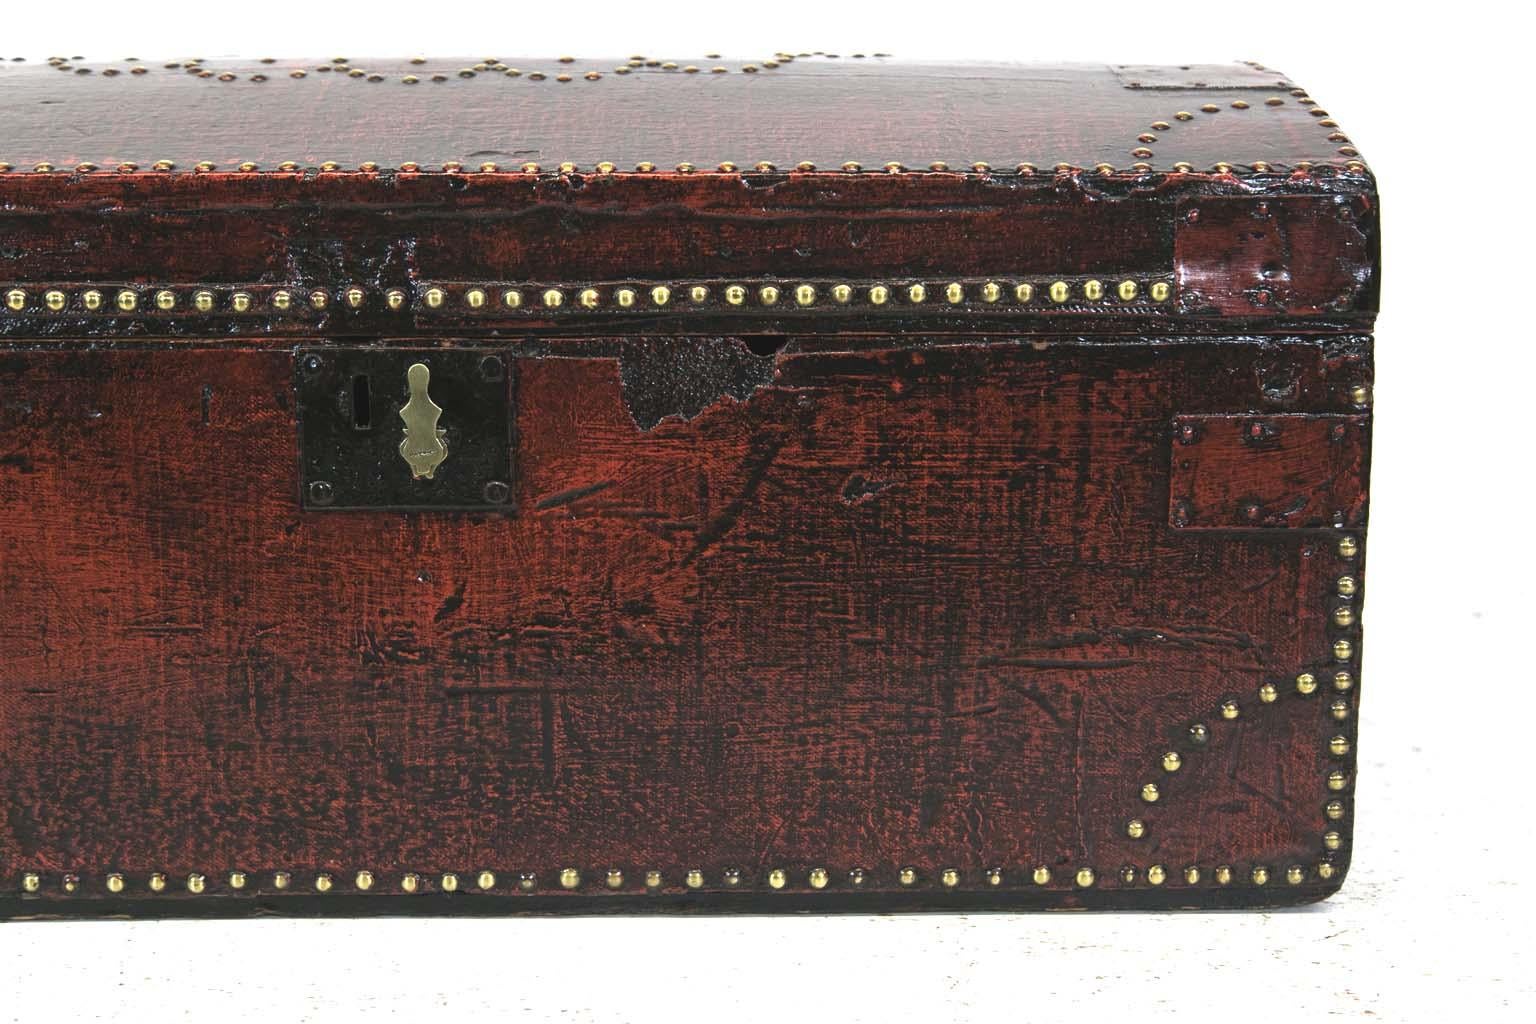 English brass studded painted trunk has steel support strapping and the original steel carrying handles. It appears that the original covering is leather which has been painted and antiqued. There is a patented brass key hole escutcheon mounted to